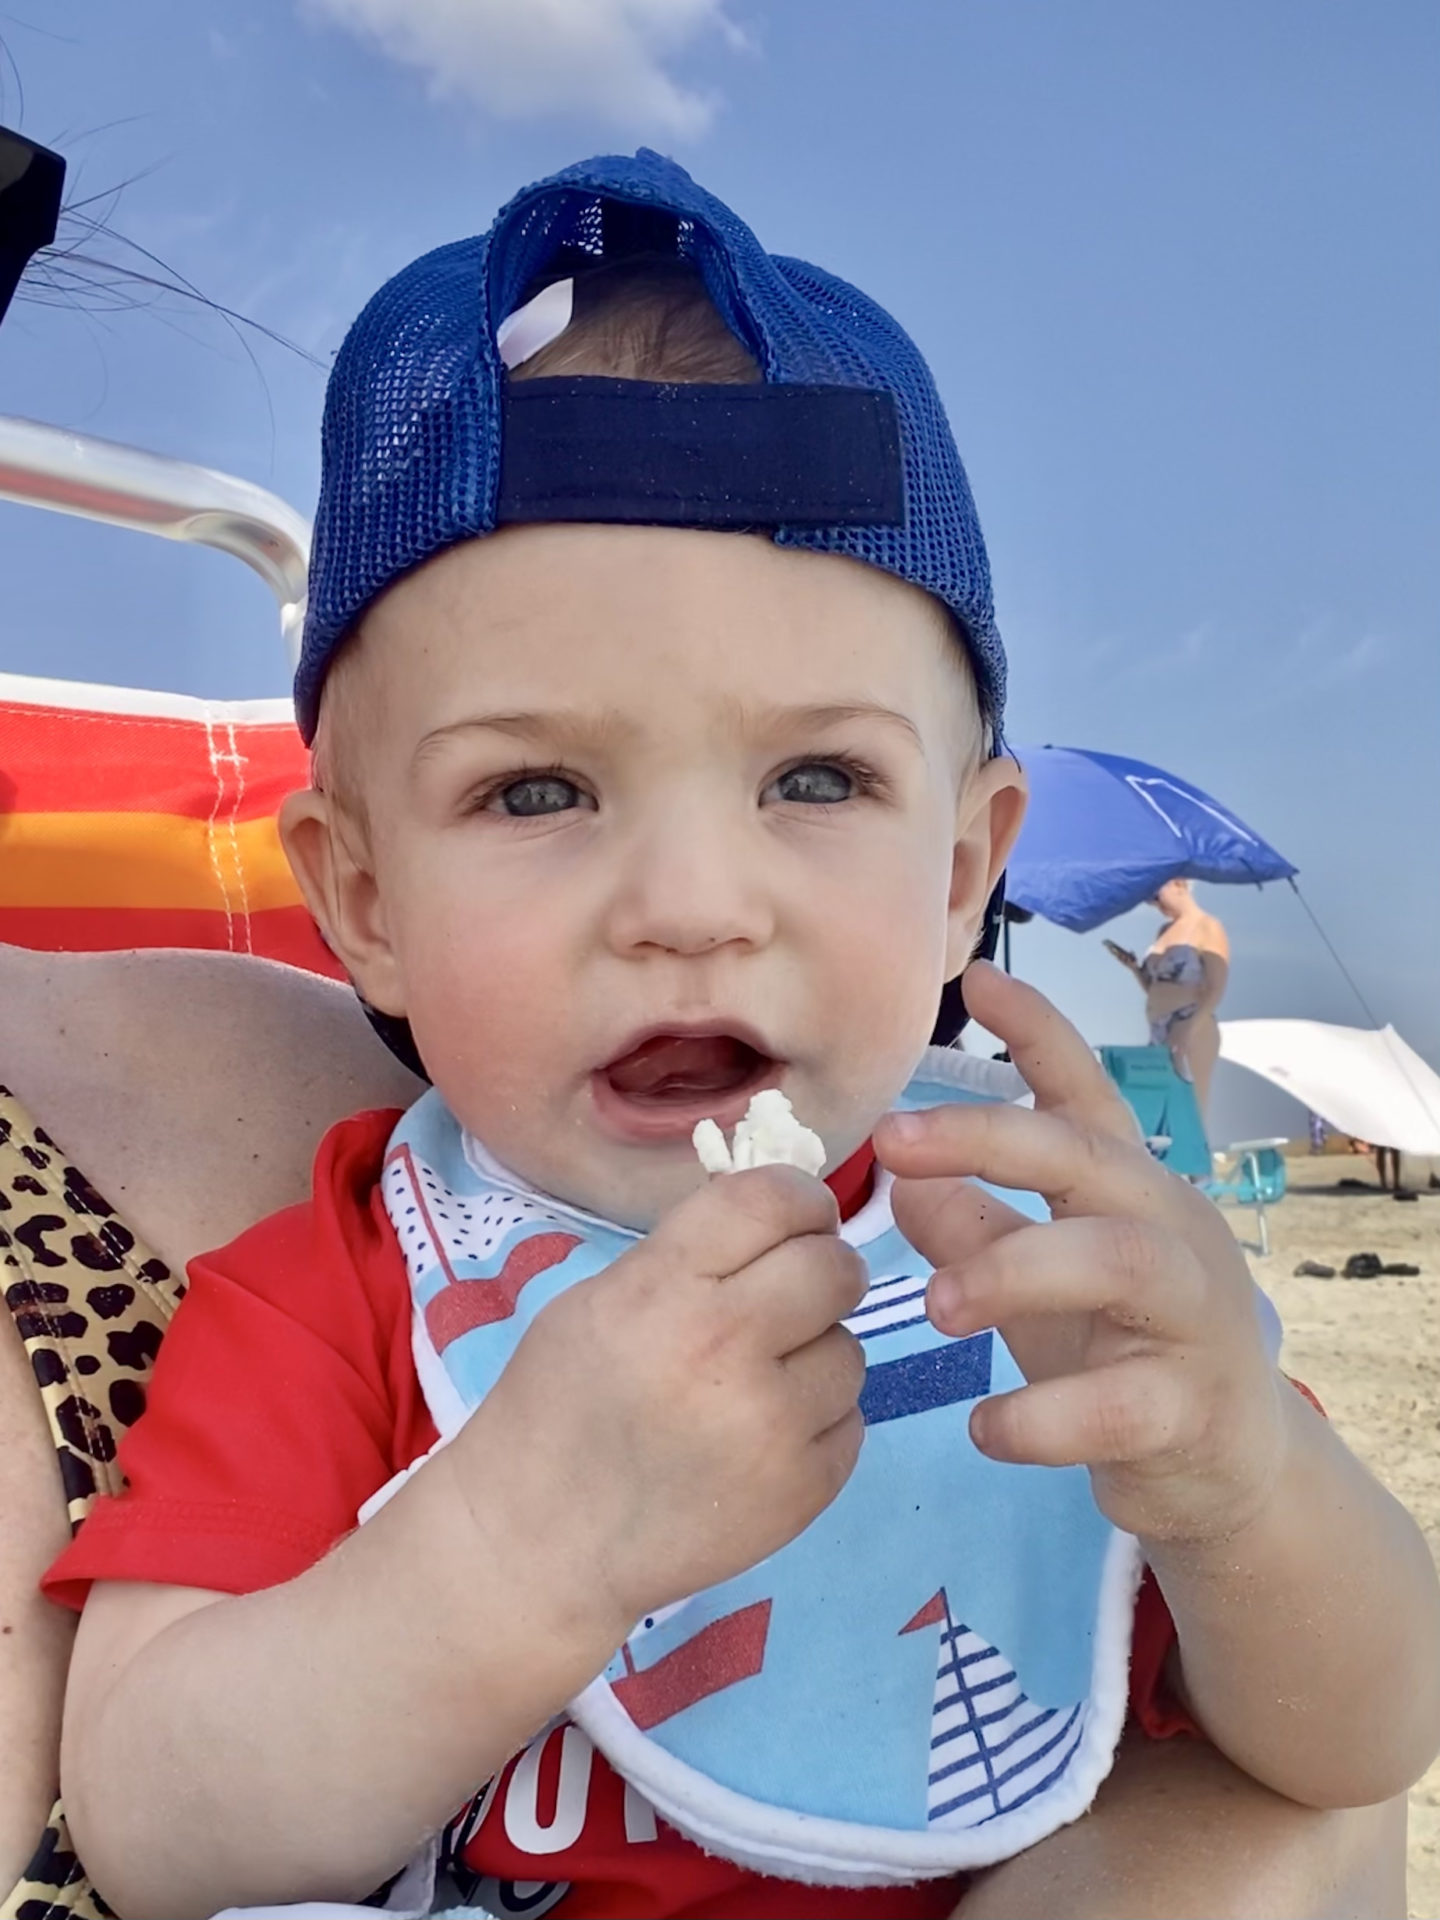 5 Beach Essentials for Toddlers - Snacks